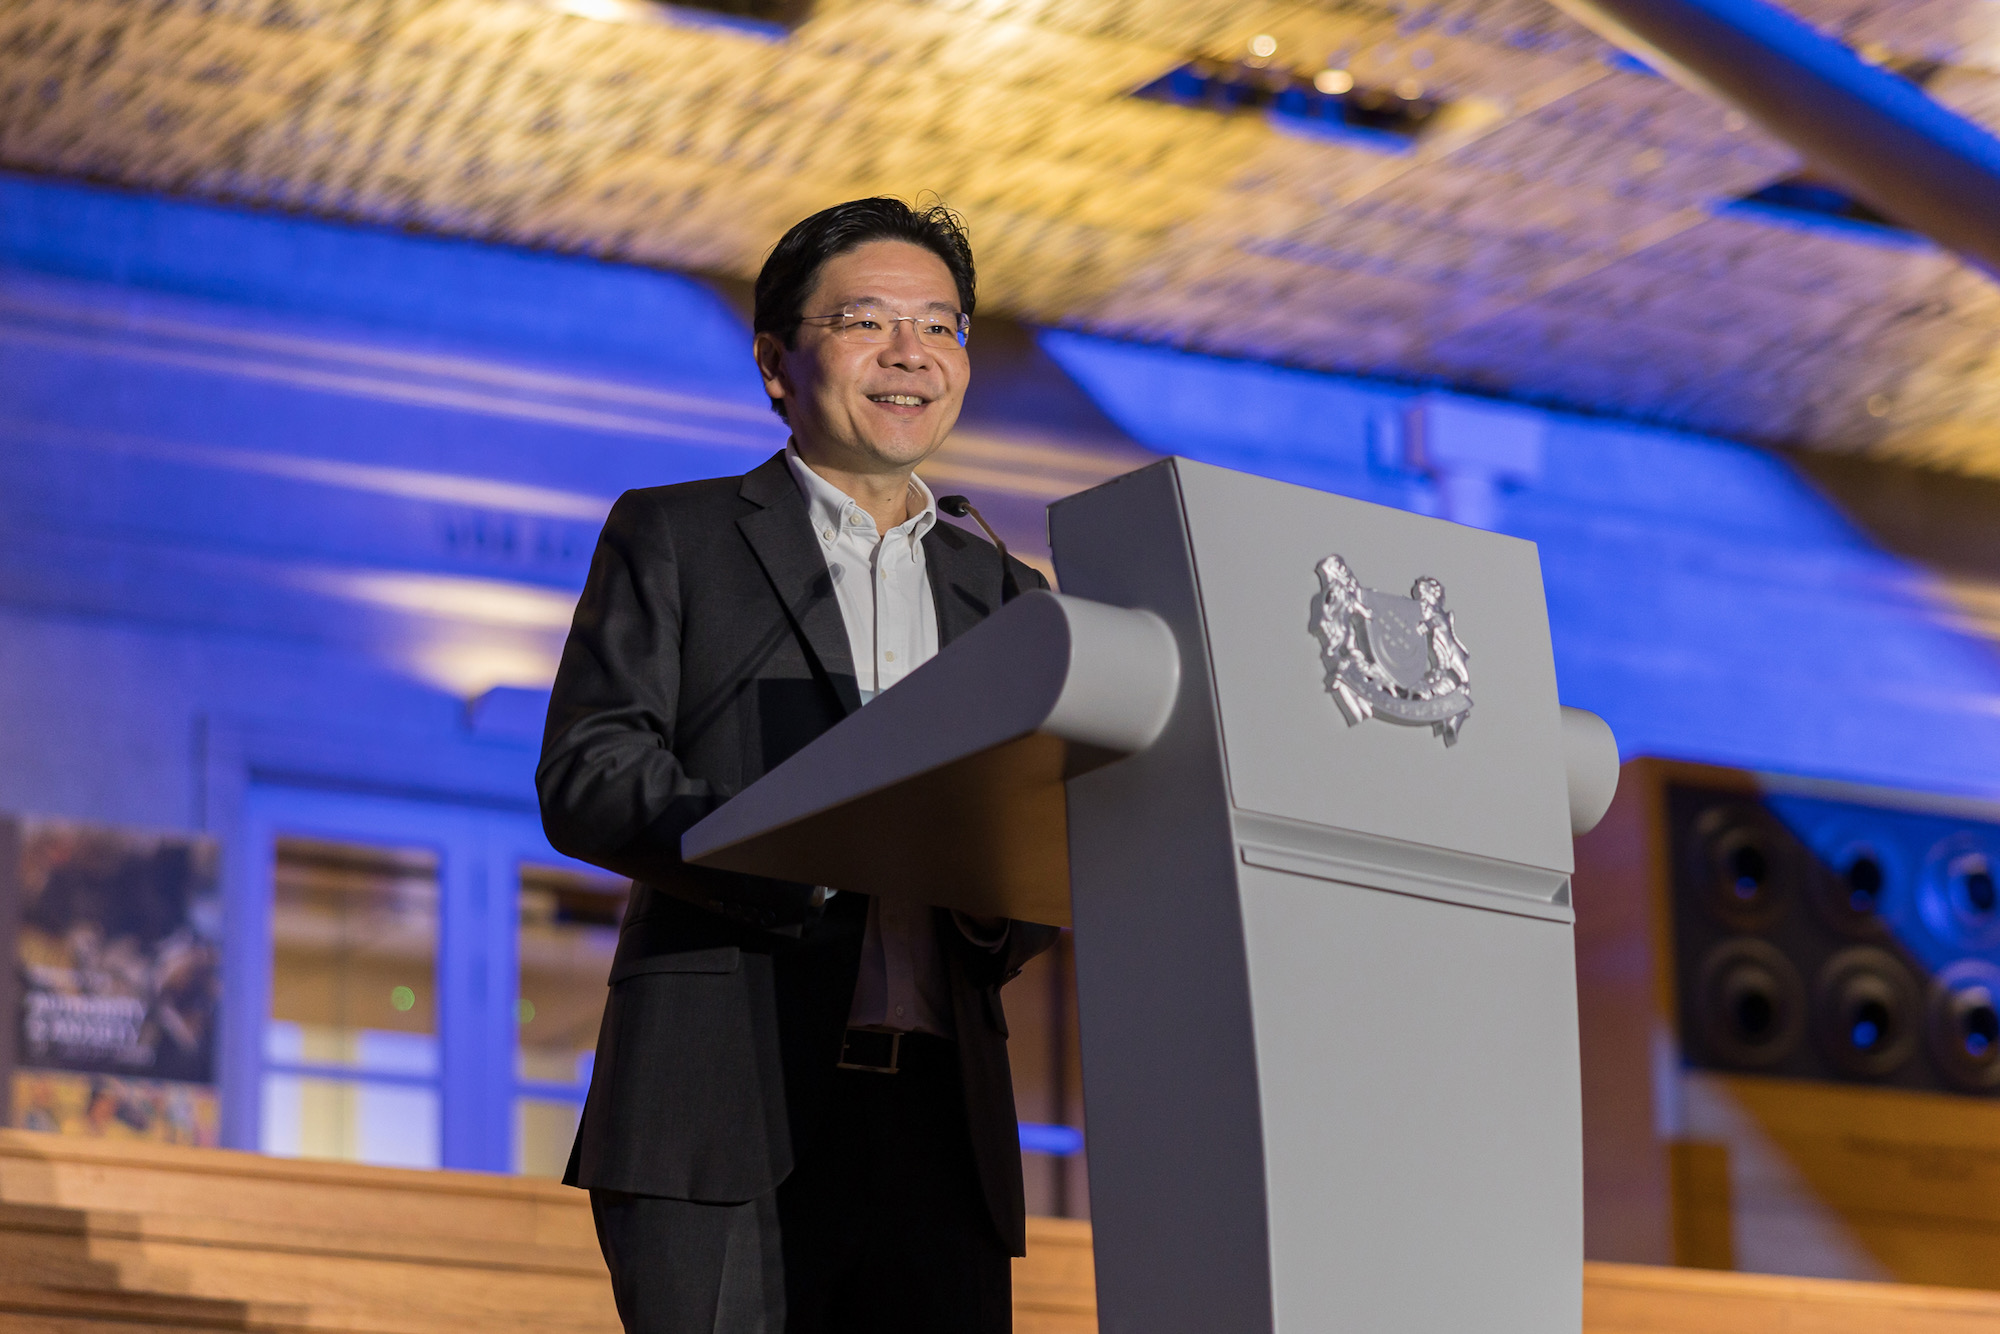 Speech by Deputy Prime Minister Lawrence Wong at SCAI